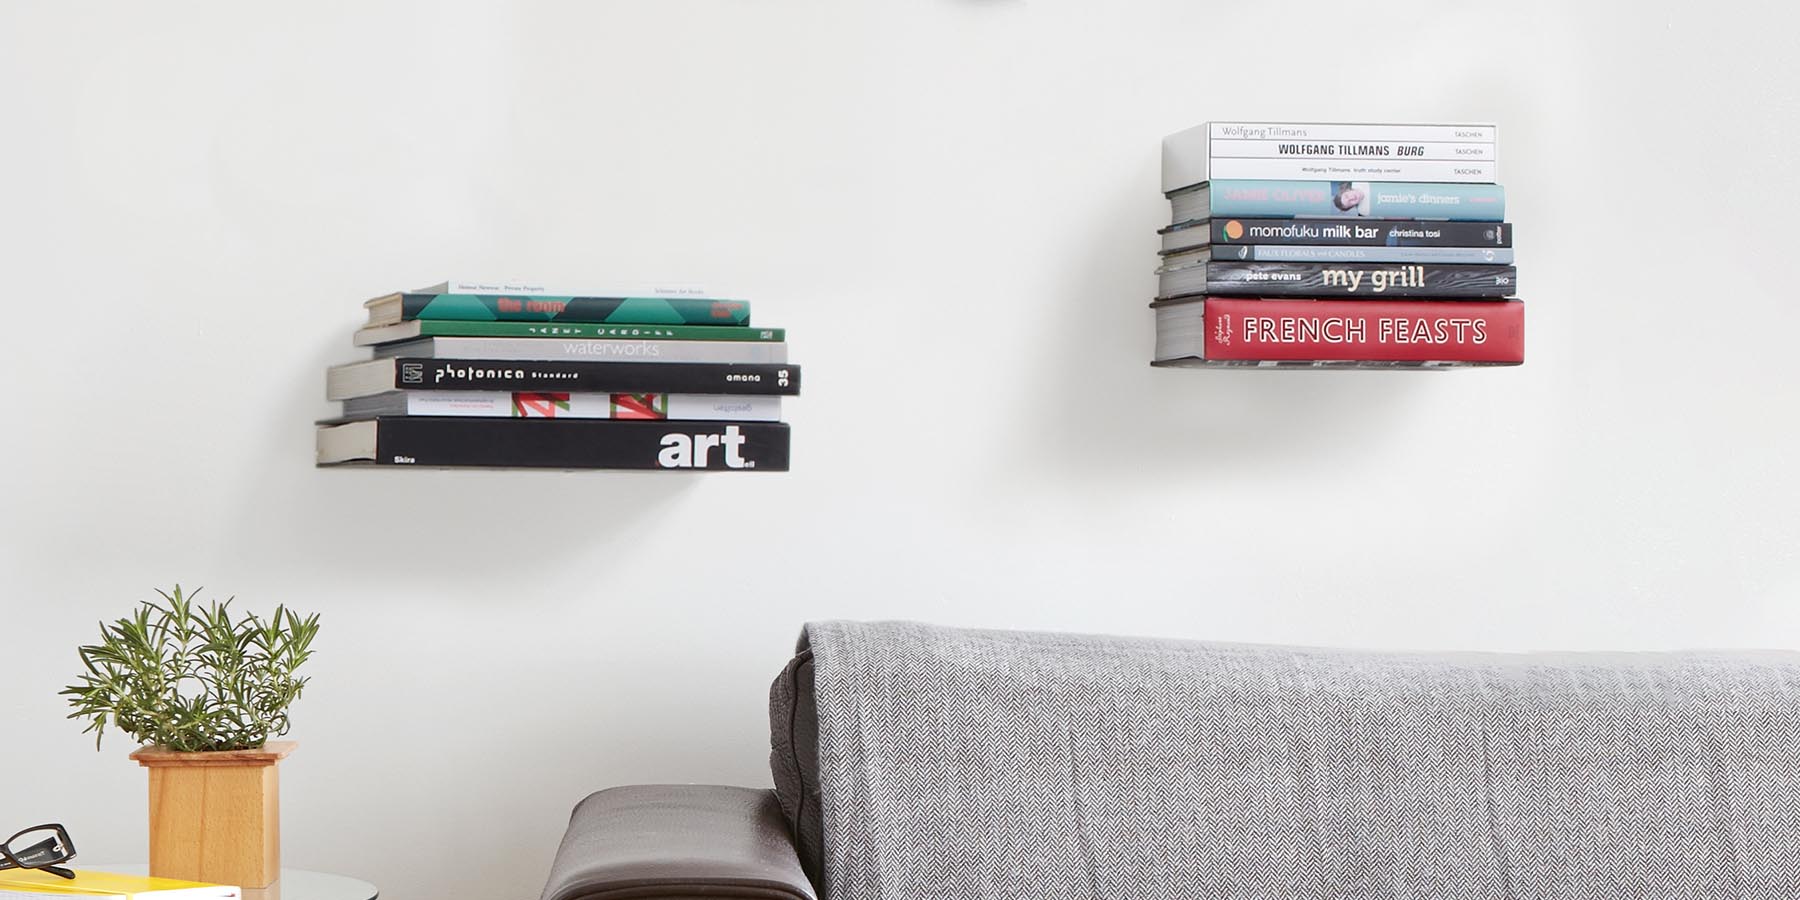 Product of the Month: Invisible shelf, 3-pack